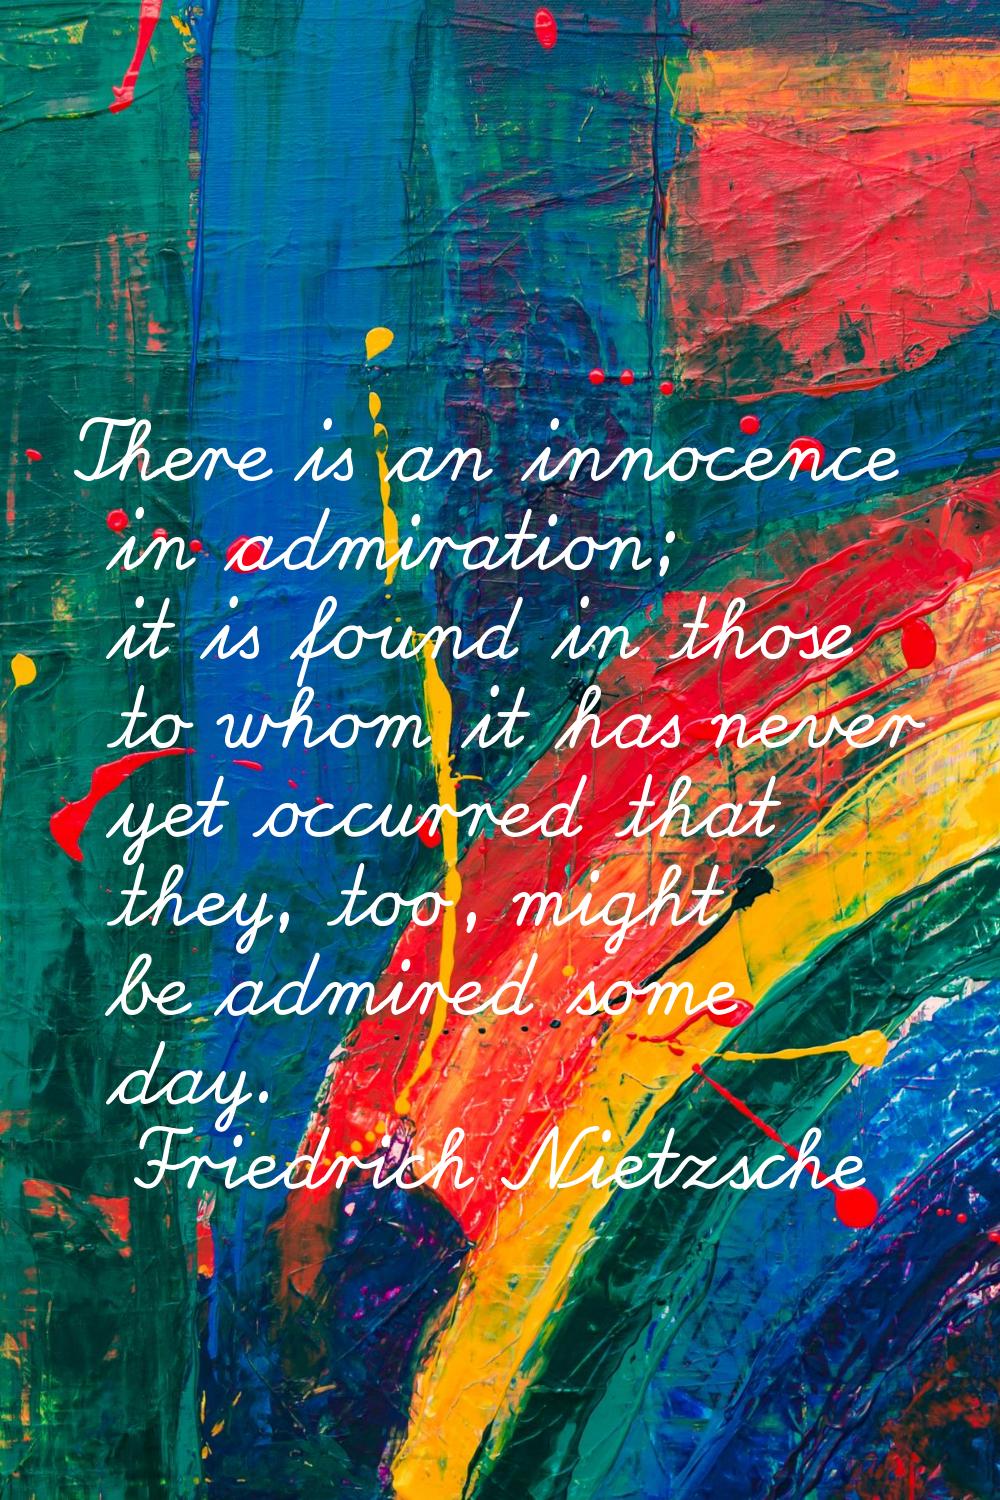 There is an innocence in admiration; it is found in those to whom it has never yet occurred that th